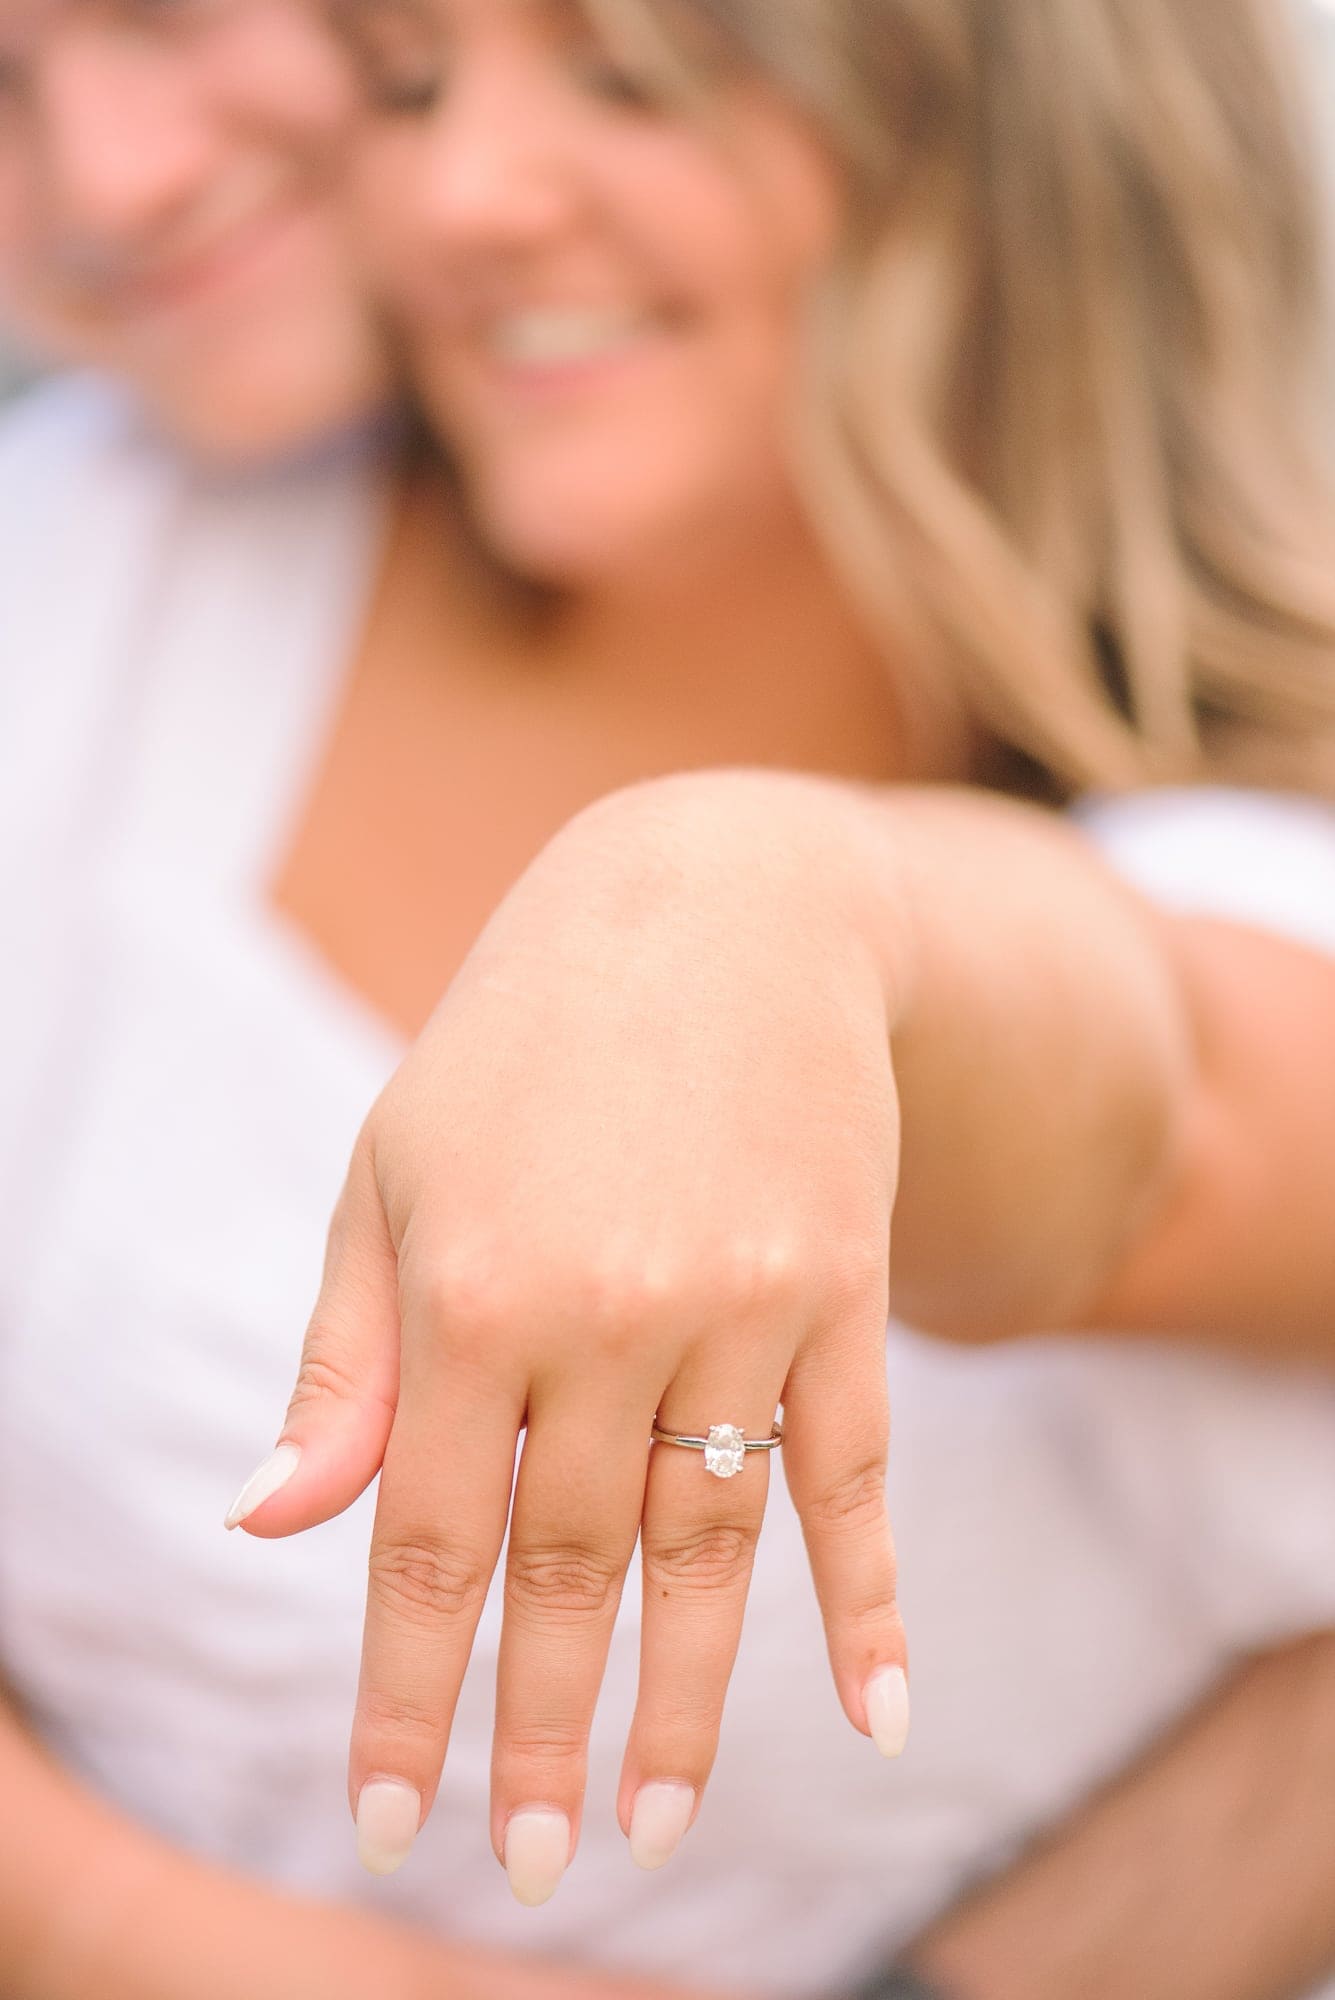 Hannah shows off her ring to the camera during their North Carolina mountain engagement photos.